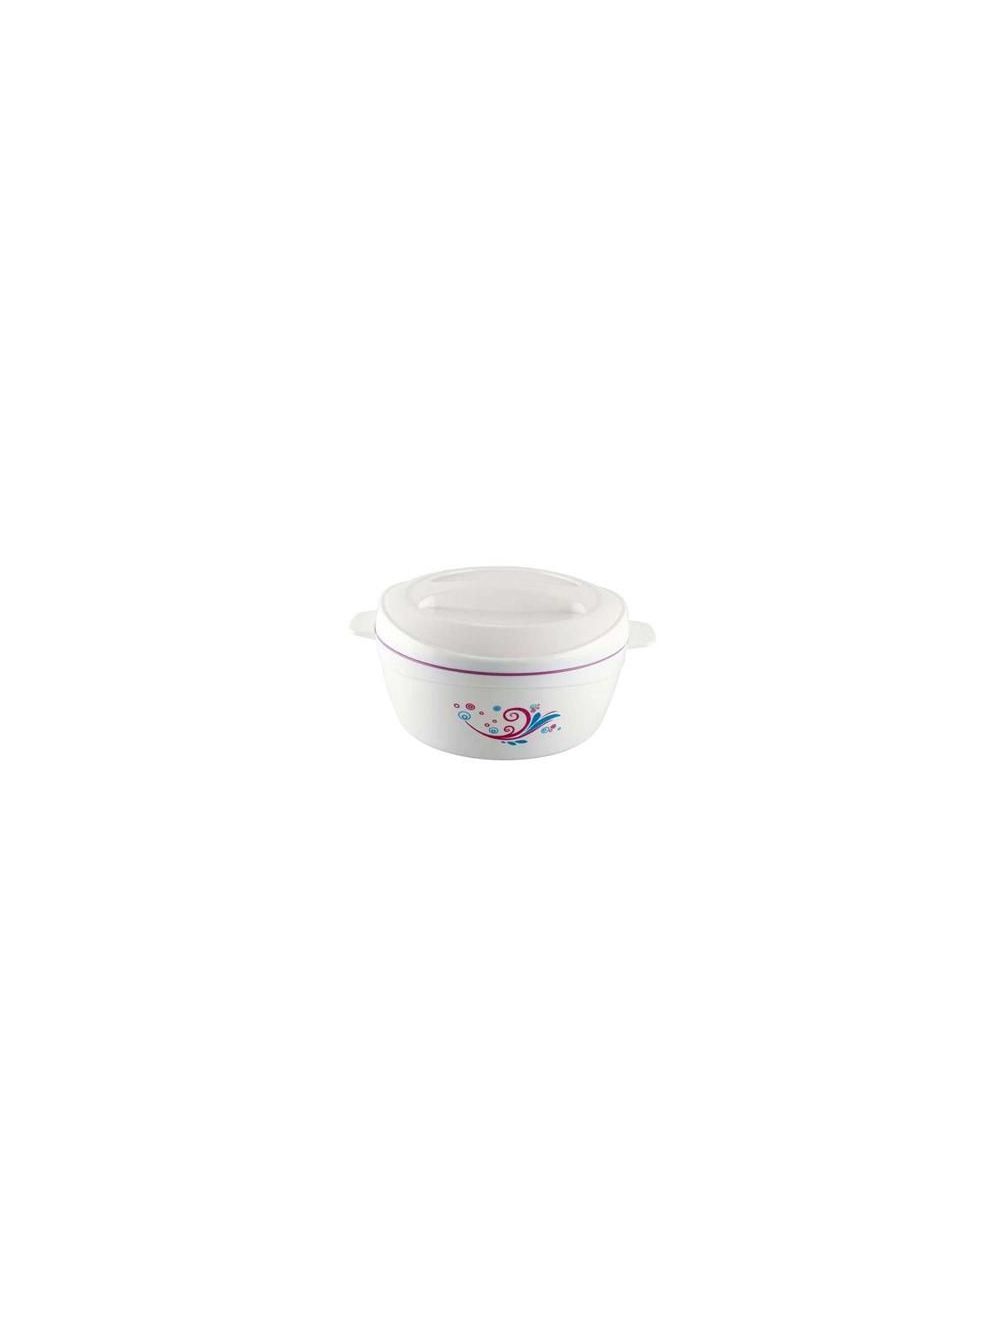 Royalford 5000 ml Deluxe Insulated Casserole